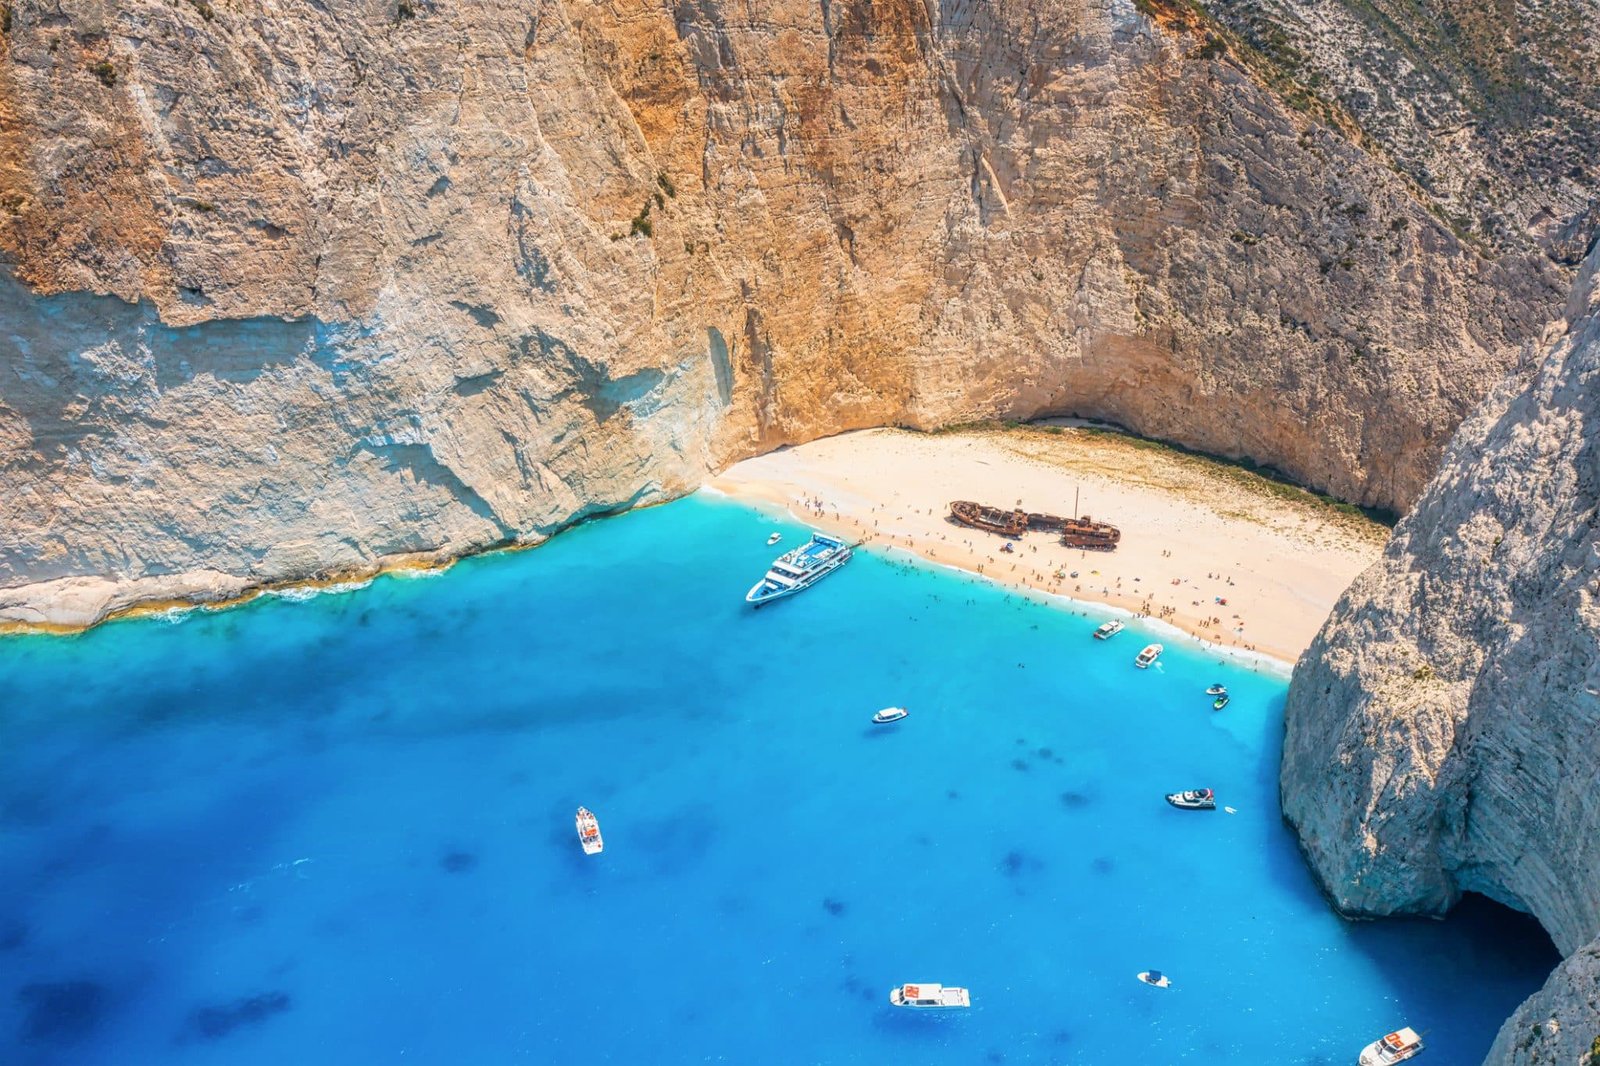 The Best Greek Islands To Visit: An Honest Guide to Help Find Your ...